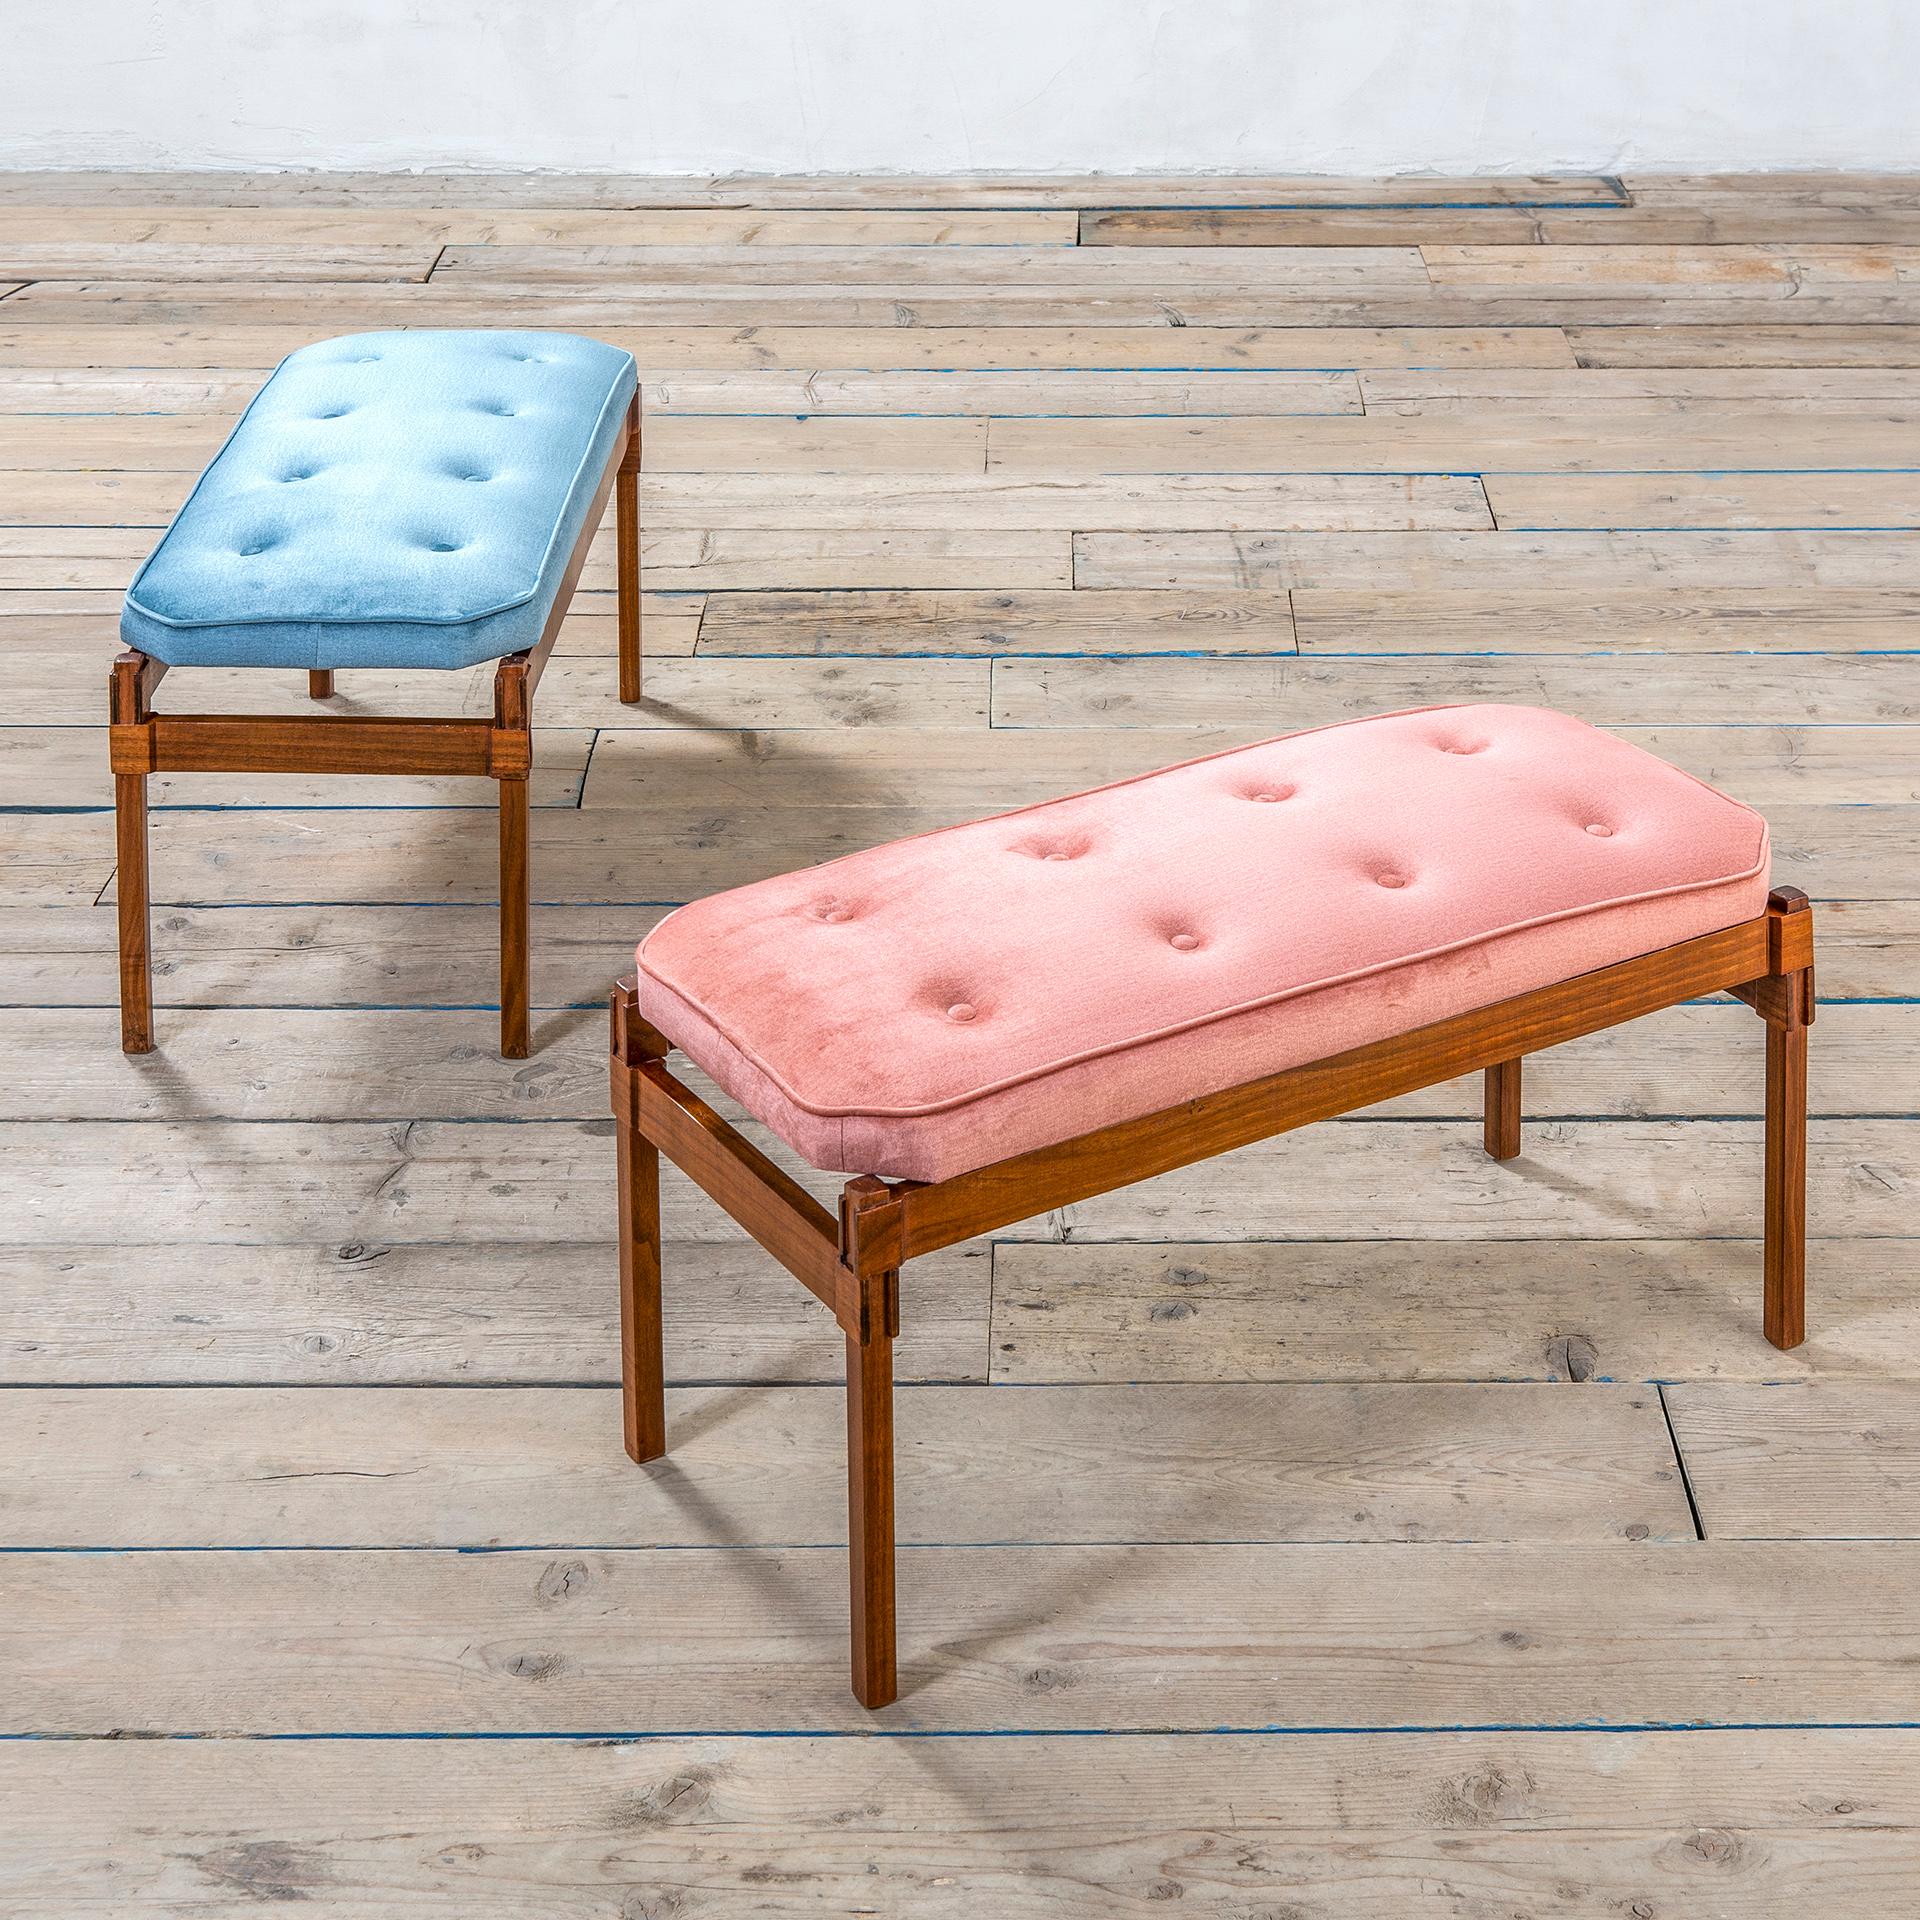 20th Century Ico Parisi Bench with Wooden Structure and Fabric Seating, Blue In Good Condition For Sale In Turin, Turin